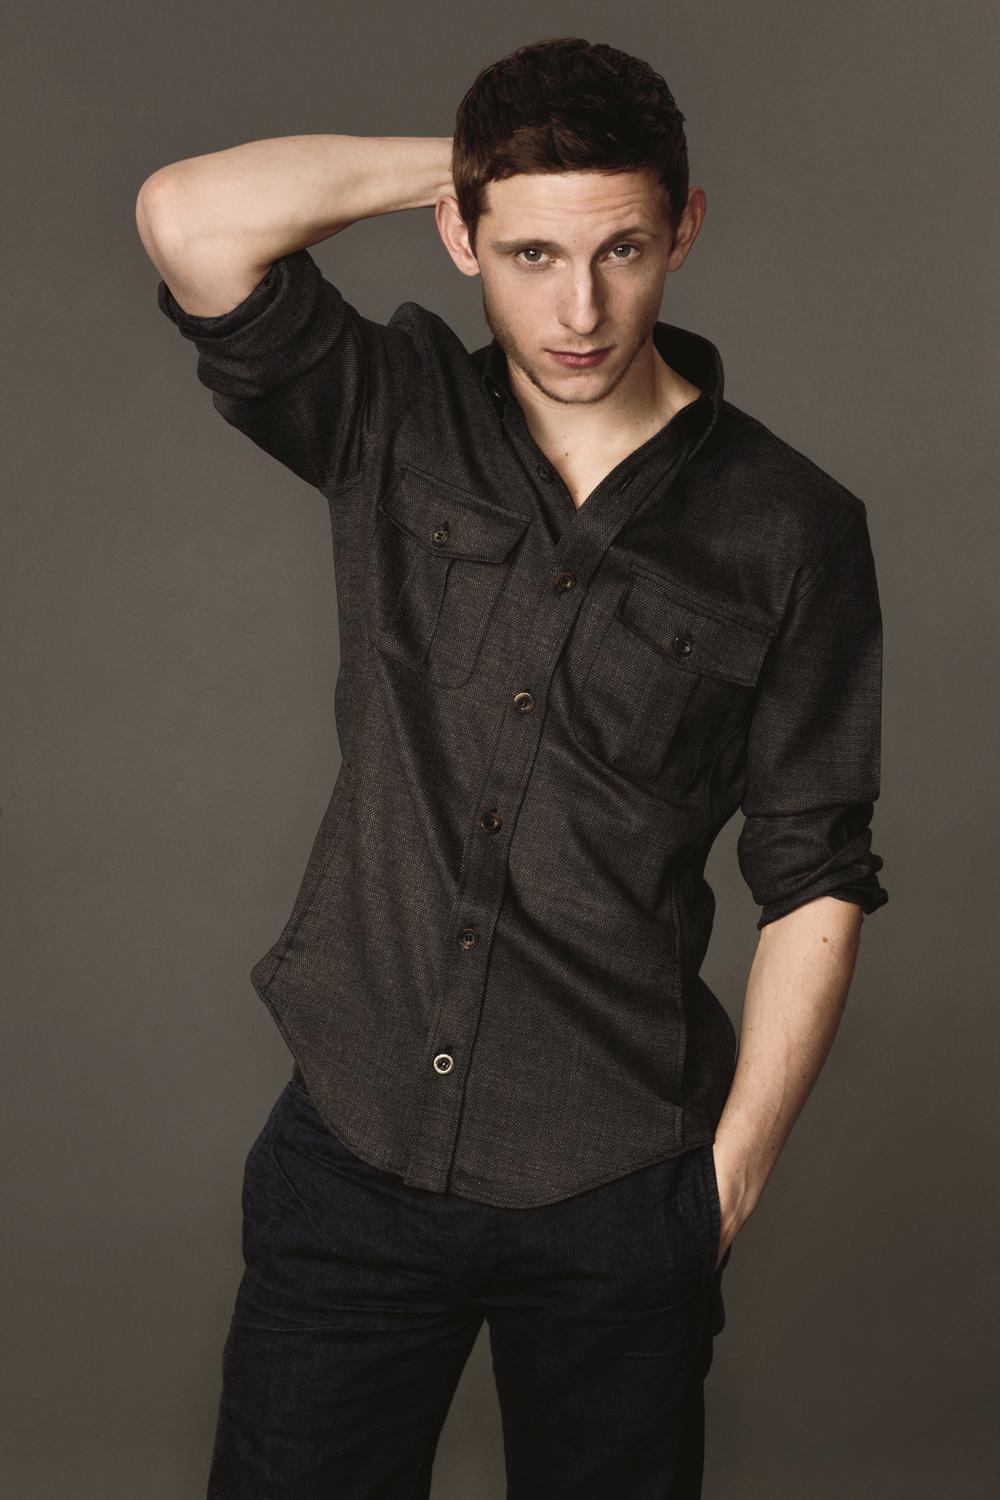 Jamie Bell. Love his accent. And his acting. I love everything I